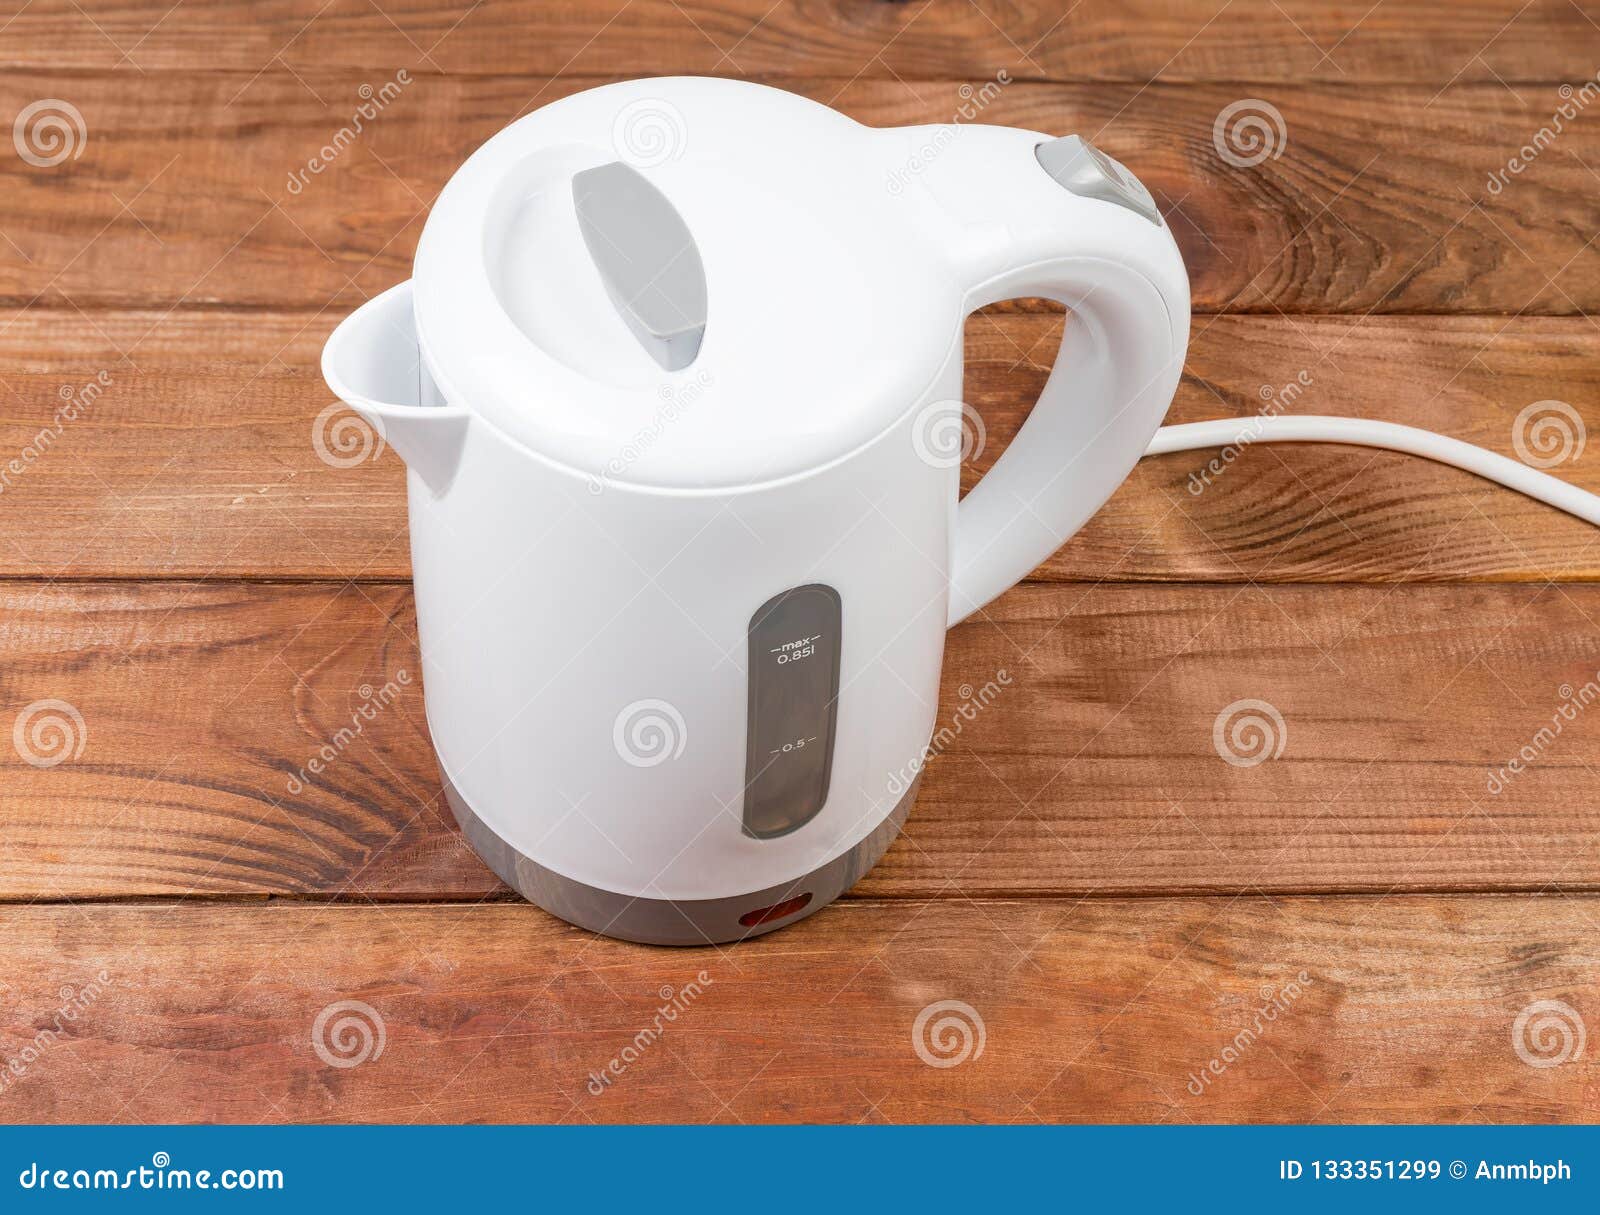 https://thumbs.dreamstime.com/z/small-white-plastic-electric-kettle-old-wooden-table-rustic-133351299.jpg